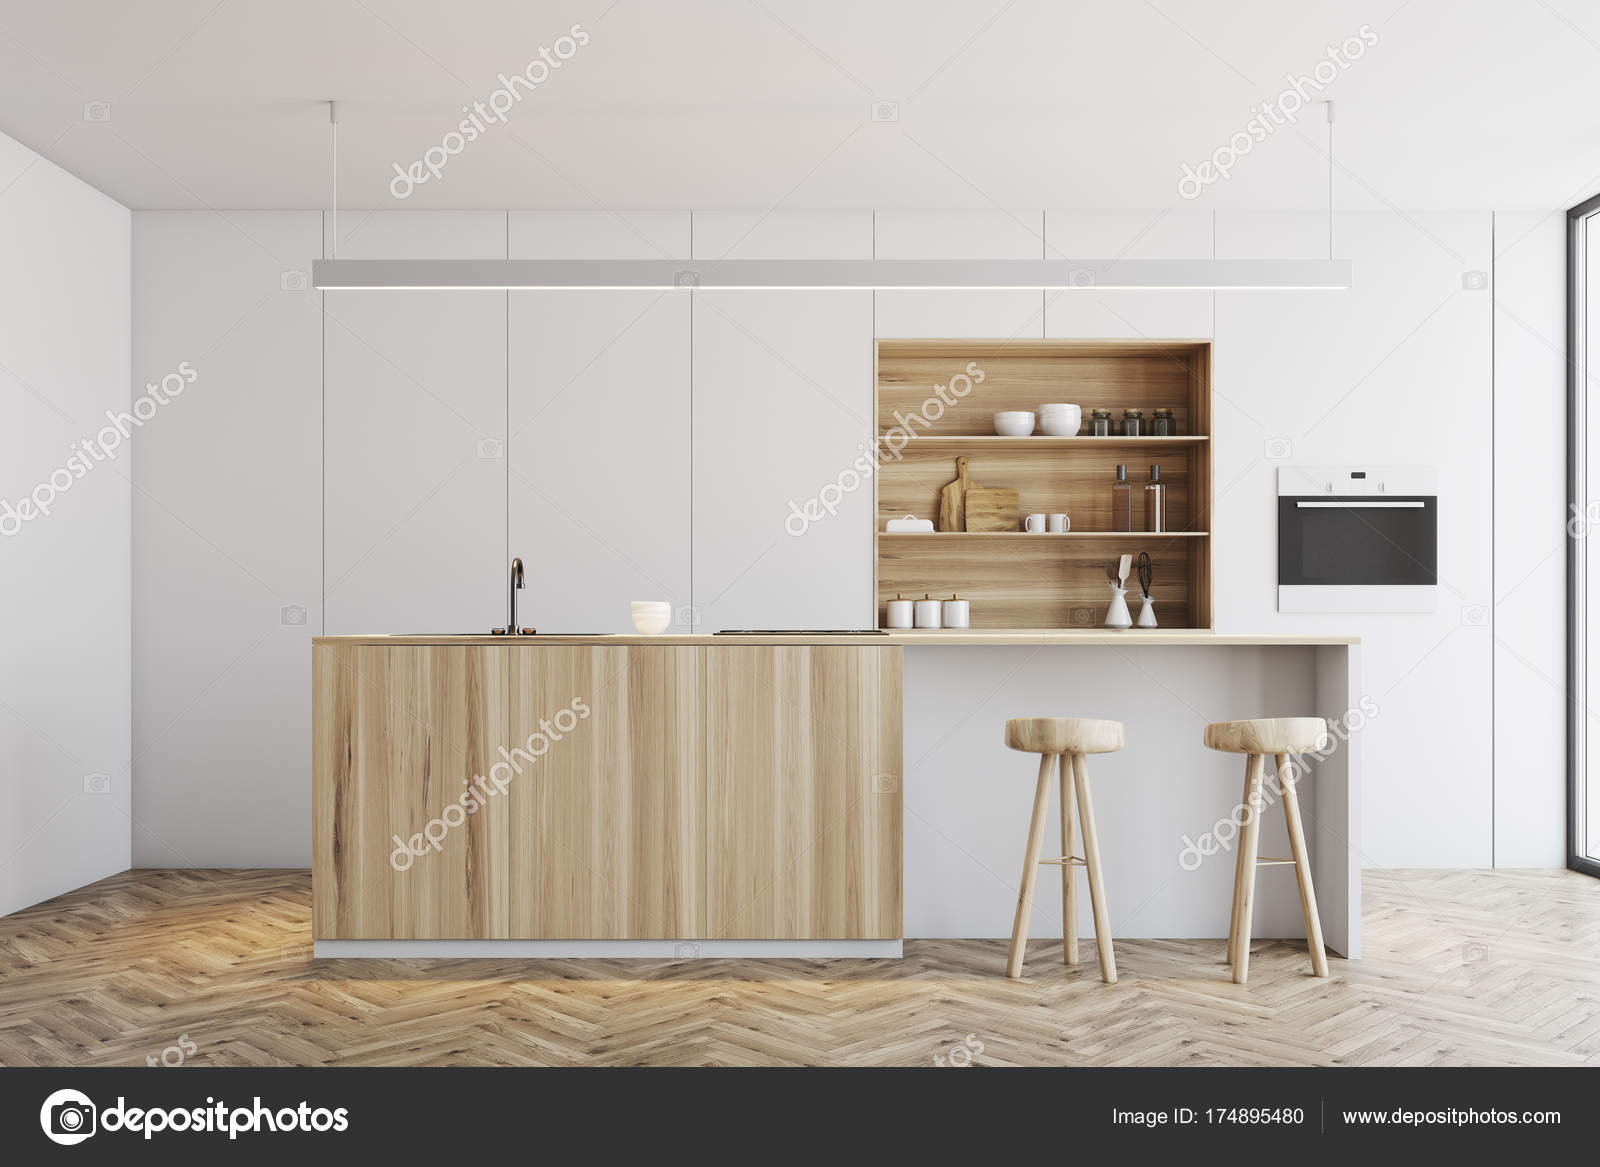 White and beige kitchen interior with bar Stock Photo by